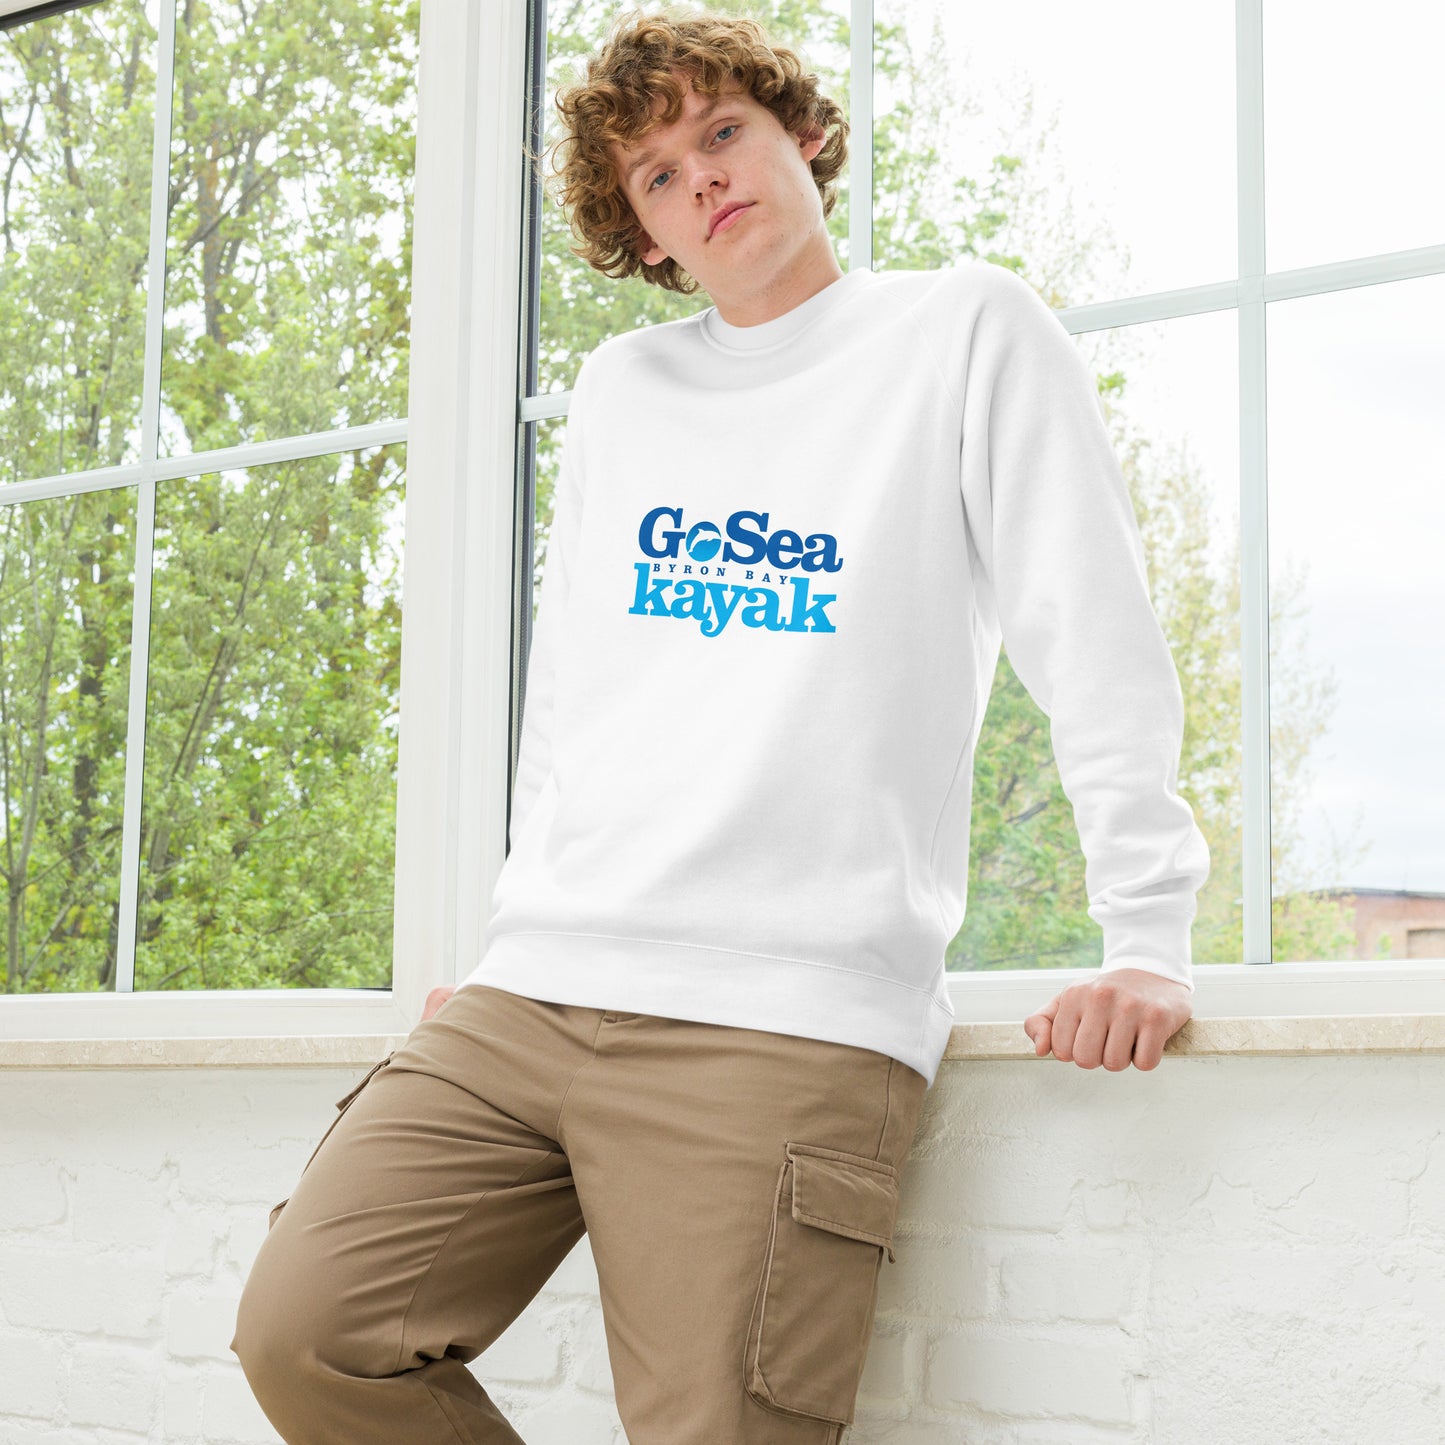  Unisex Sweatshirt - White - Front view being warn by man leaning on a window - Go Sea Kayak Byron Bay logo on front - Genuine Byron Bay Merchandise | Produced by Go Sea Kayak Byron Bay 